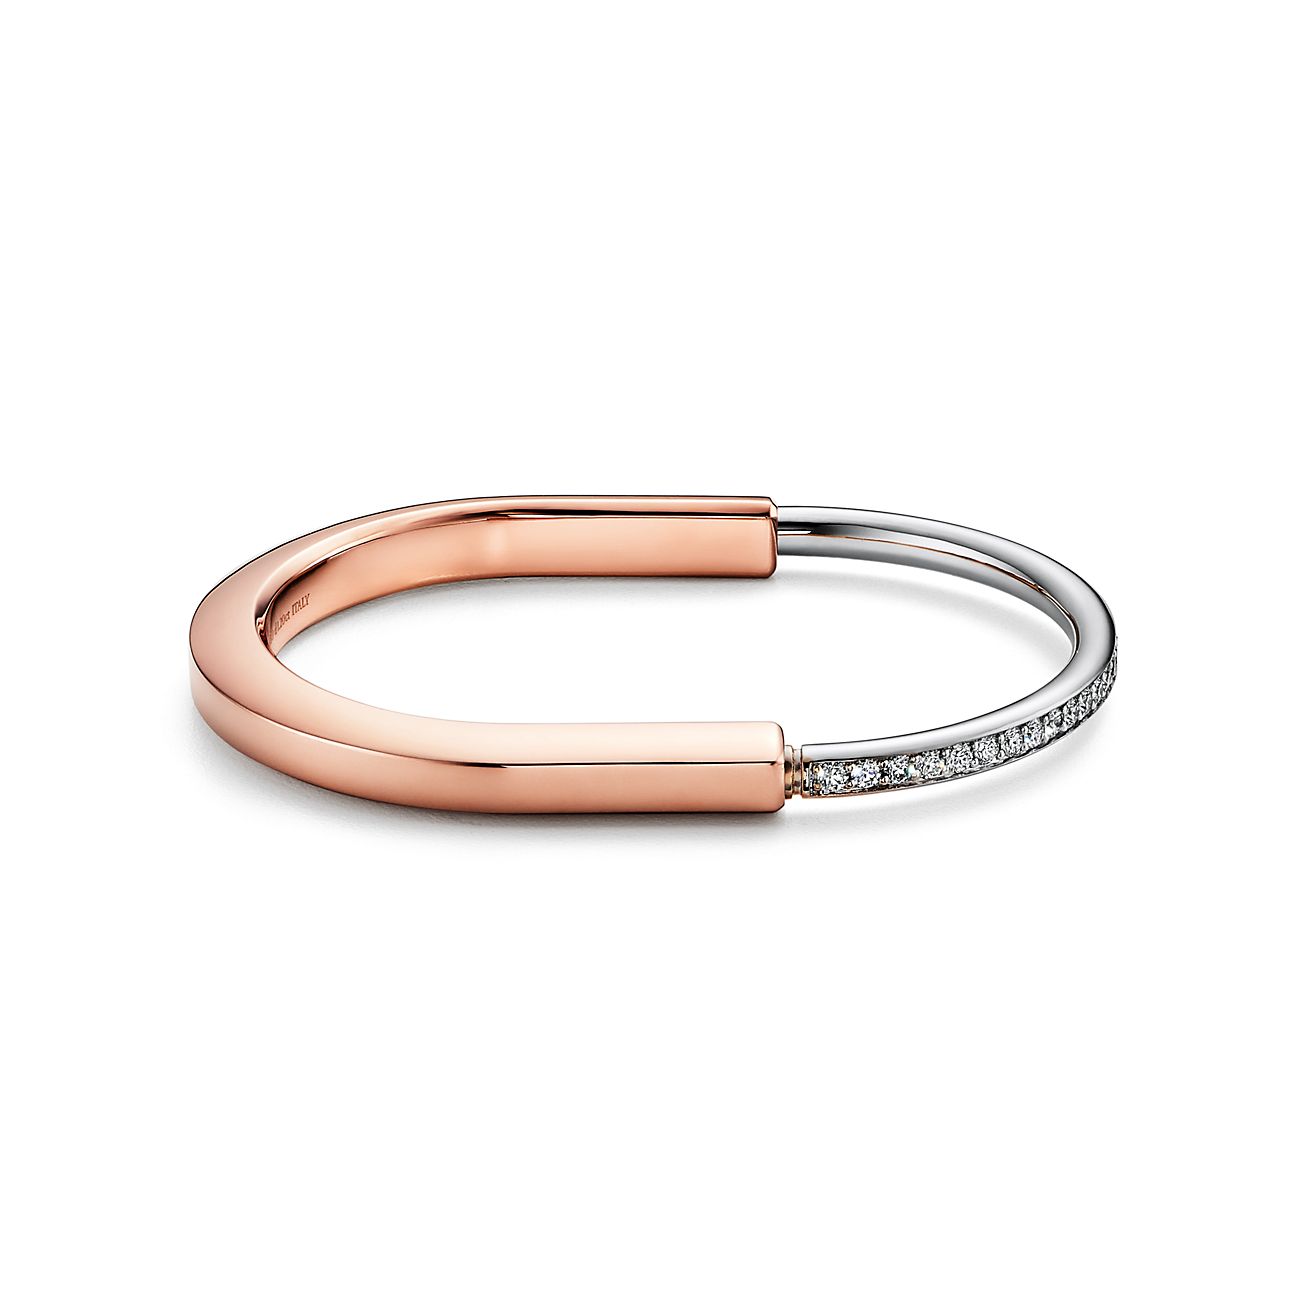 Bracelet & Bangle Size Guide at Michael Hill at Michael Hill NZ